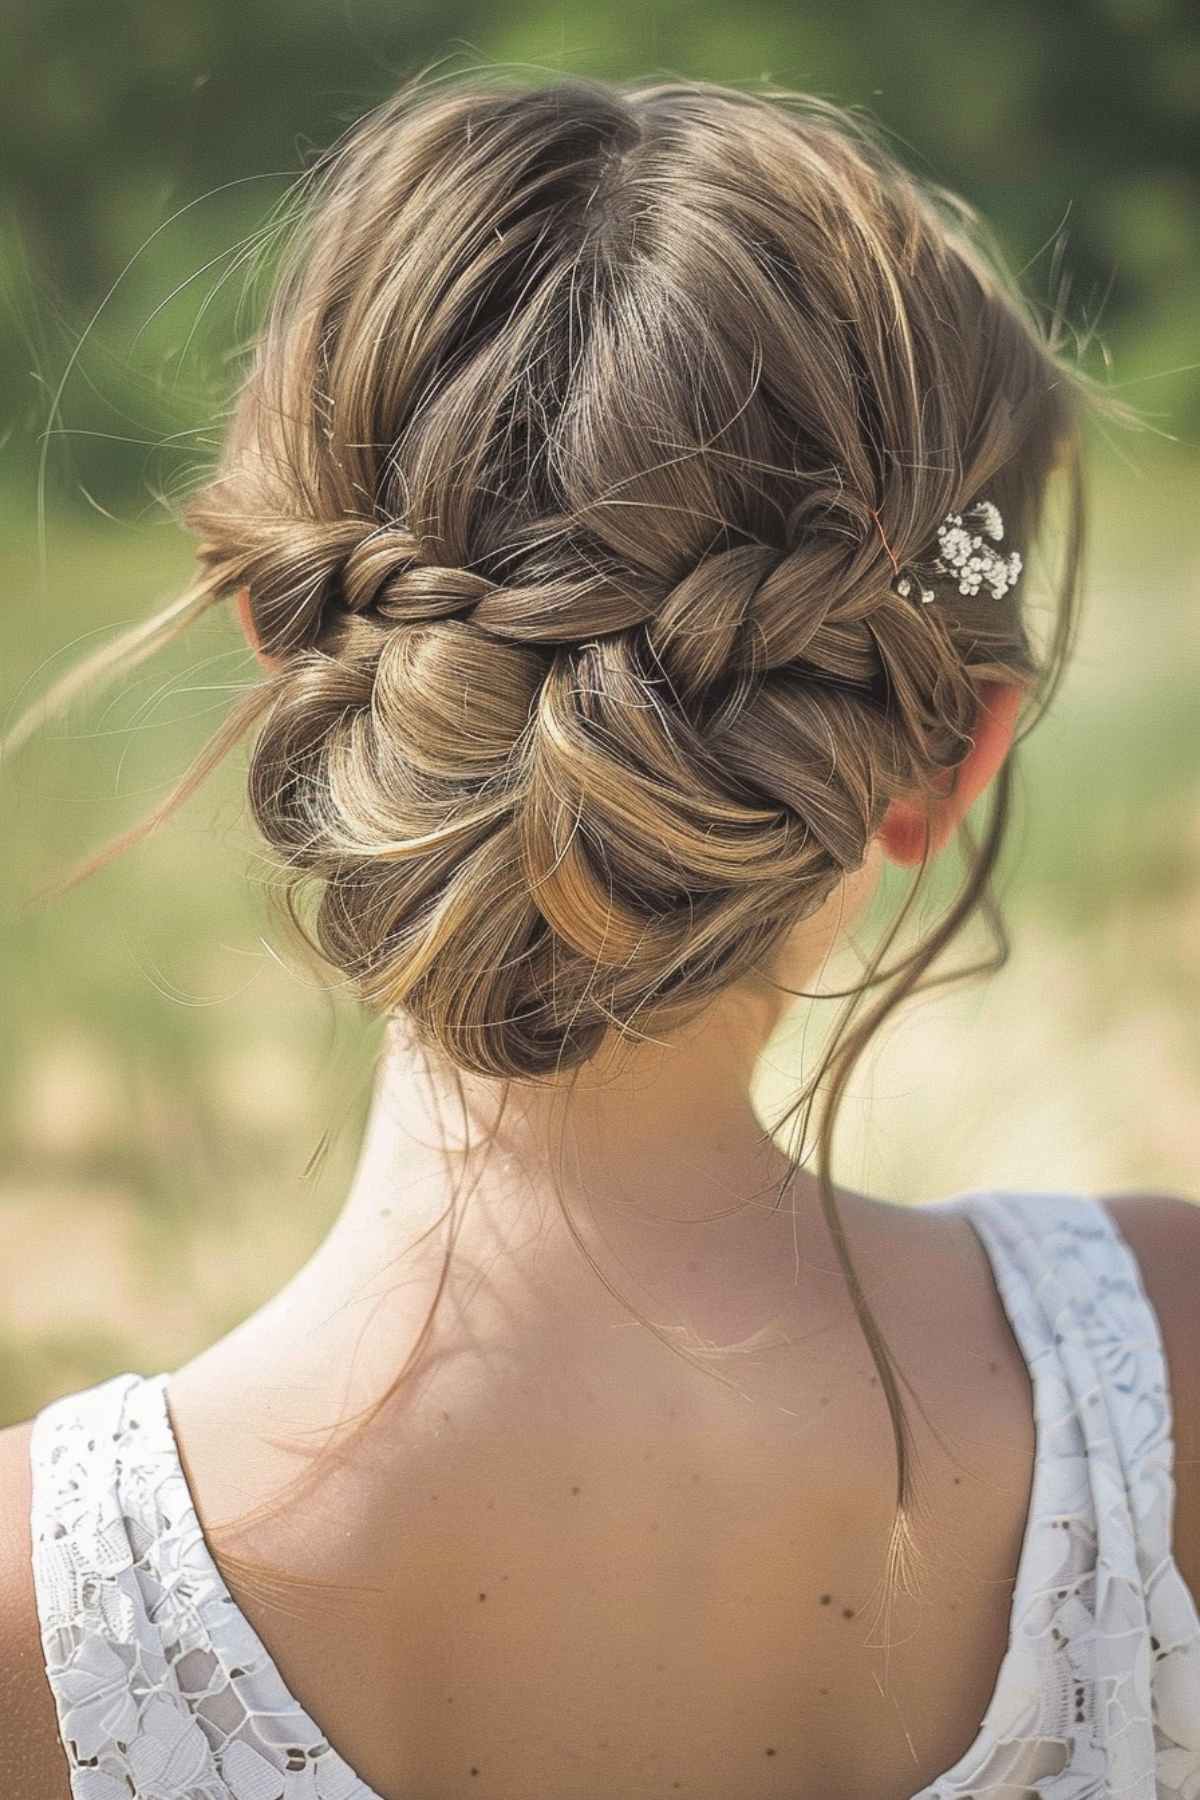 Braided updo for thick hair, perfect hot weather hairstyle